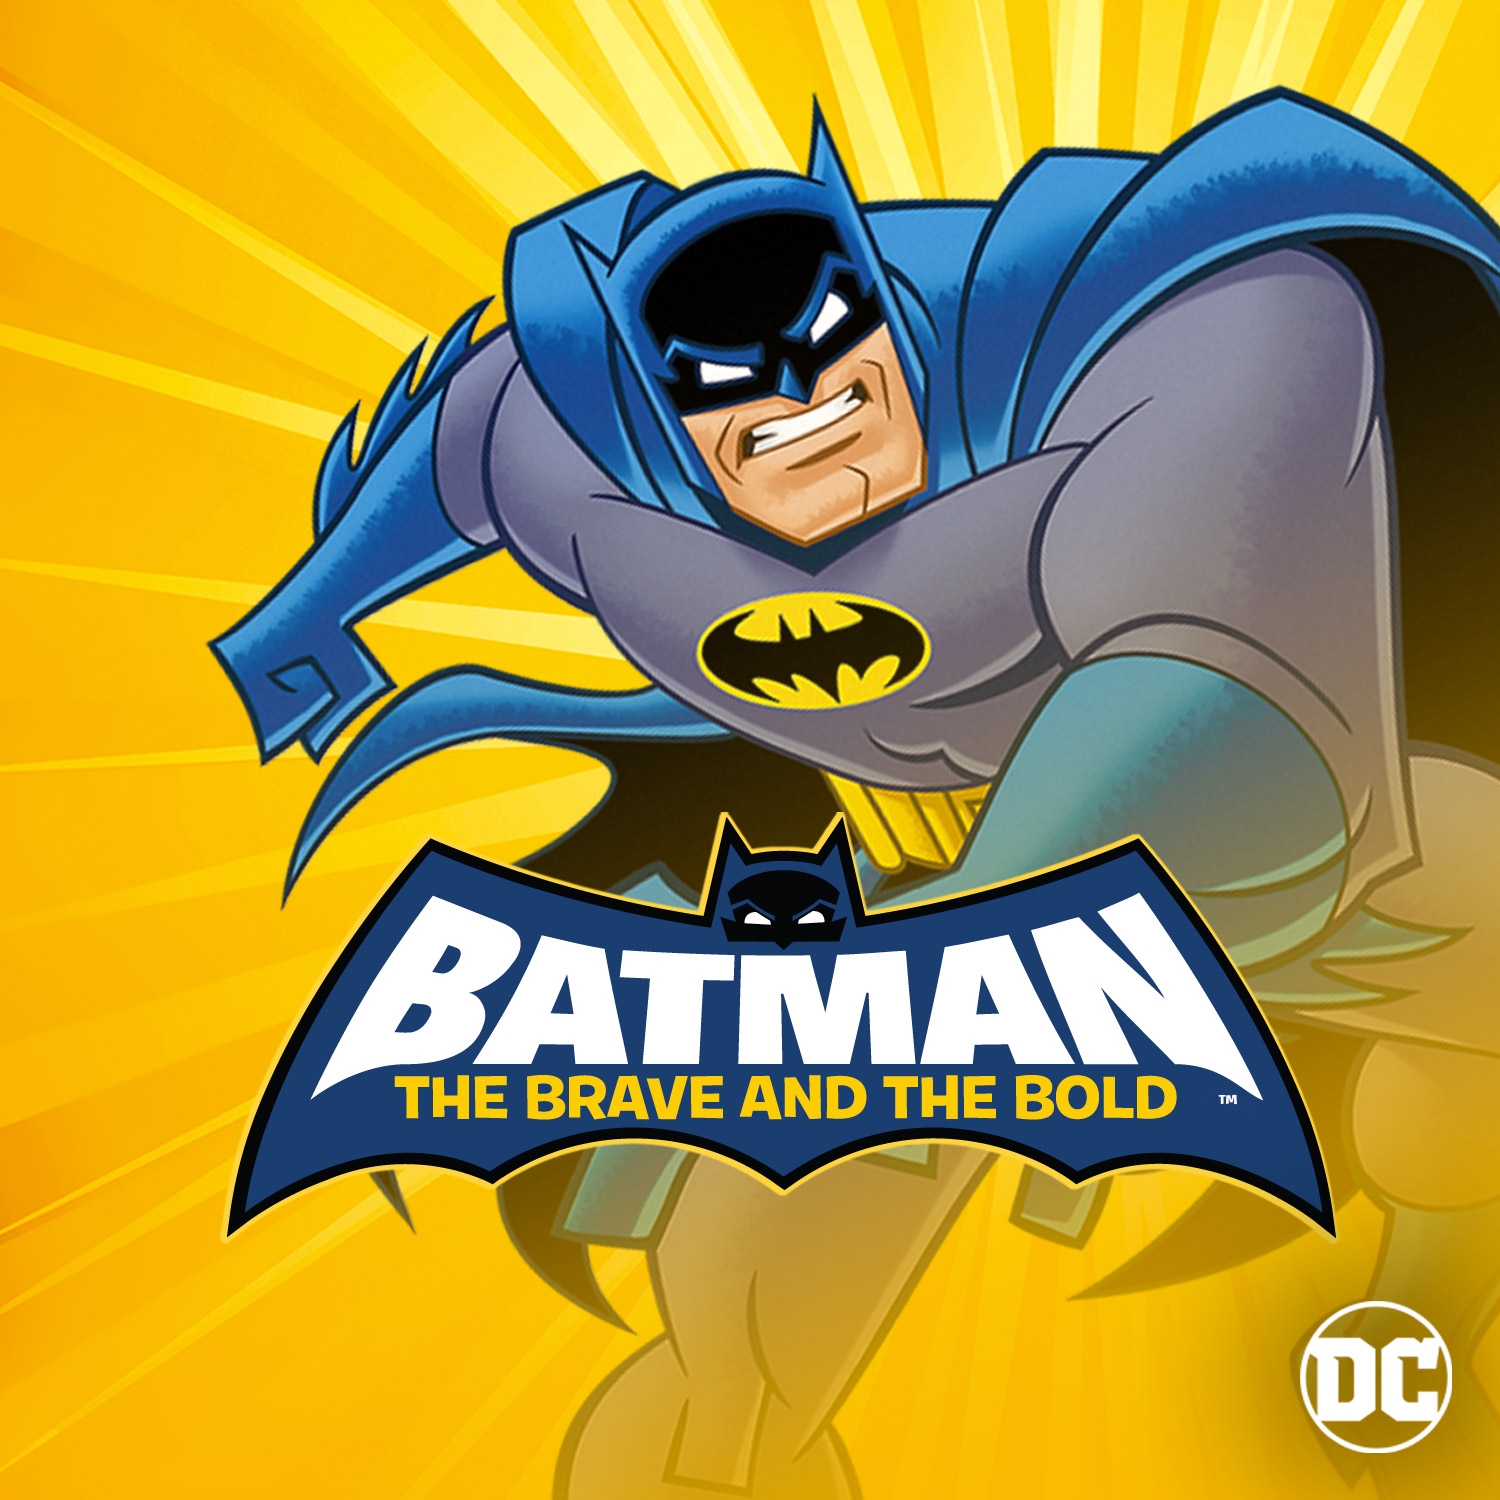 Watch Batman: The Brave and the Bold Online | Stream Seasons 1-3 Now | Stan